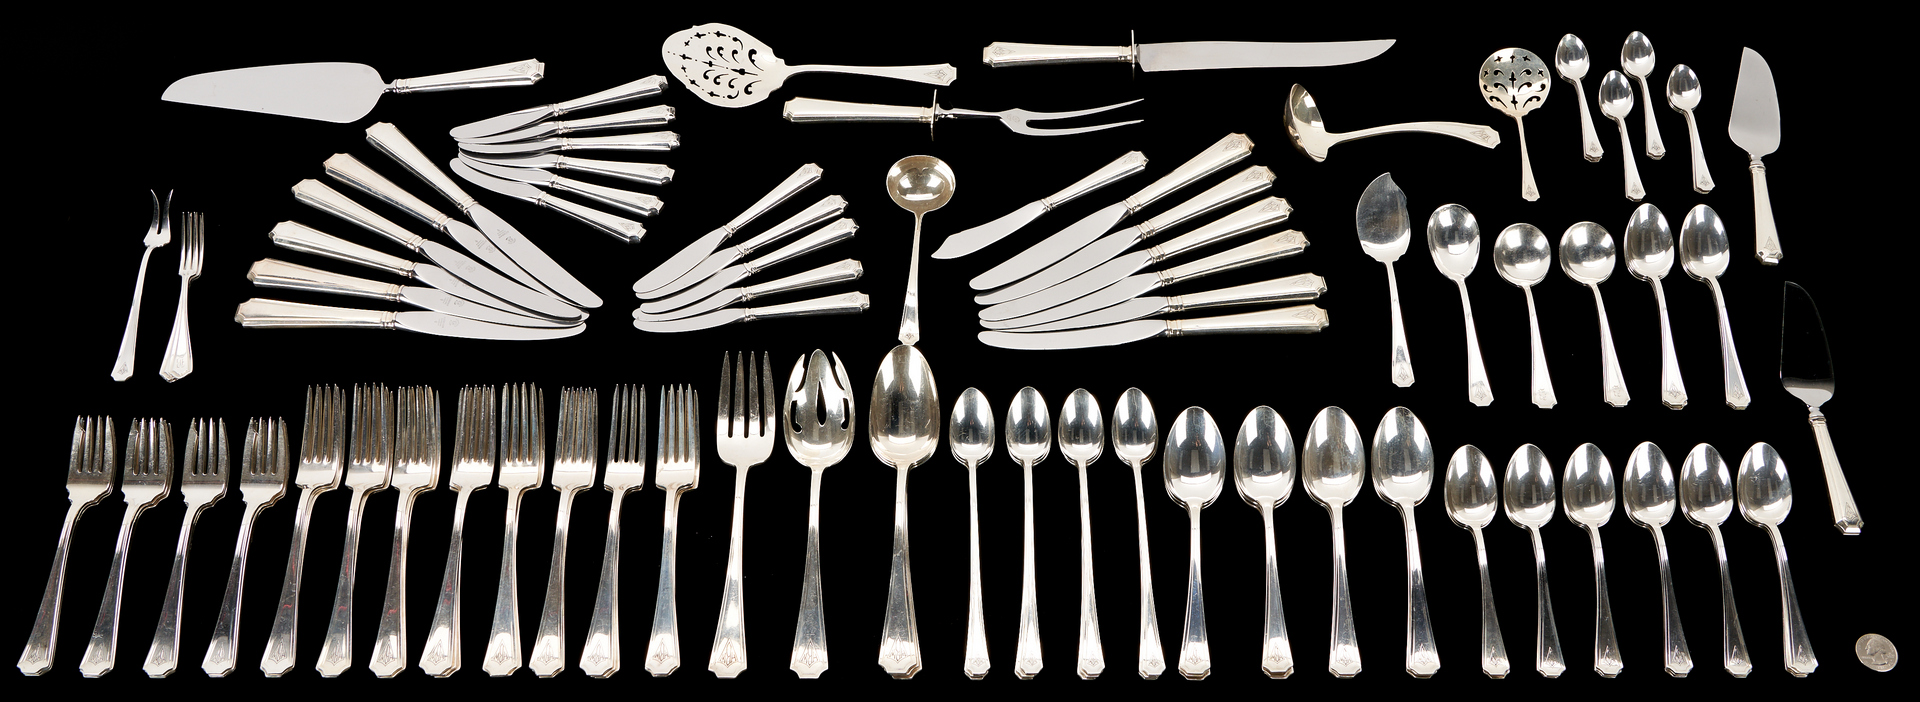 Lot 99: Fairfax Sterling Silver Flatware Service for 12 and more, 144 pcs. total